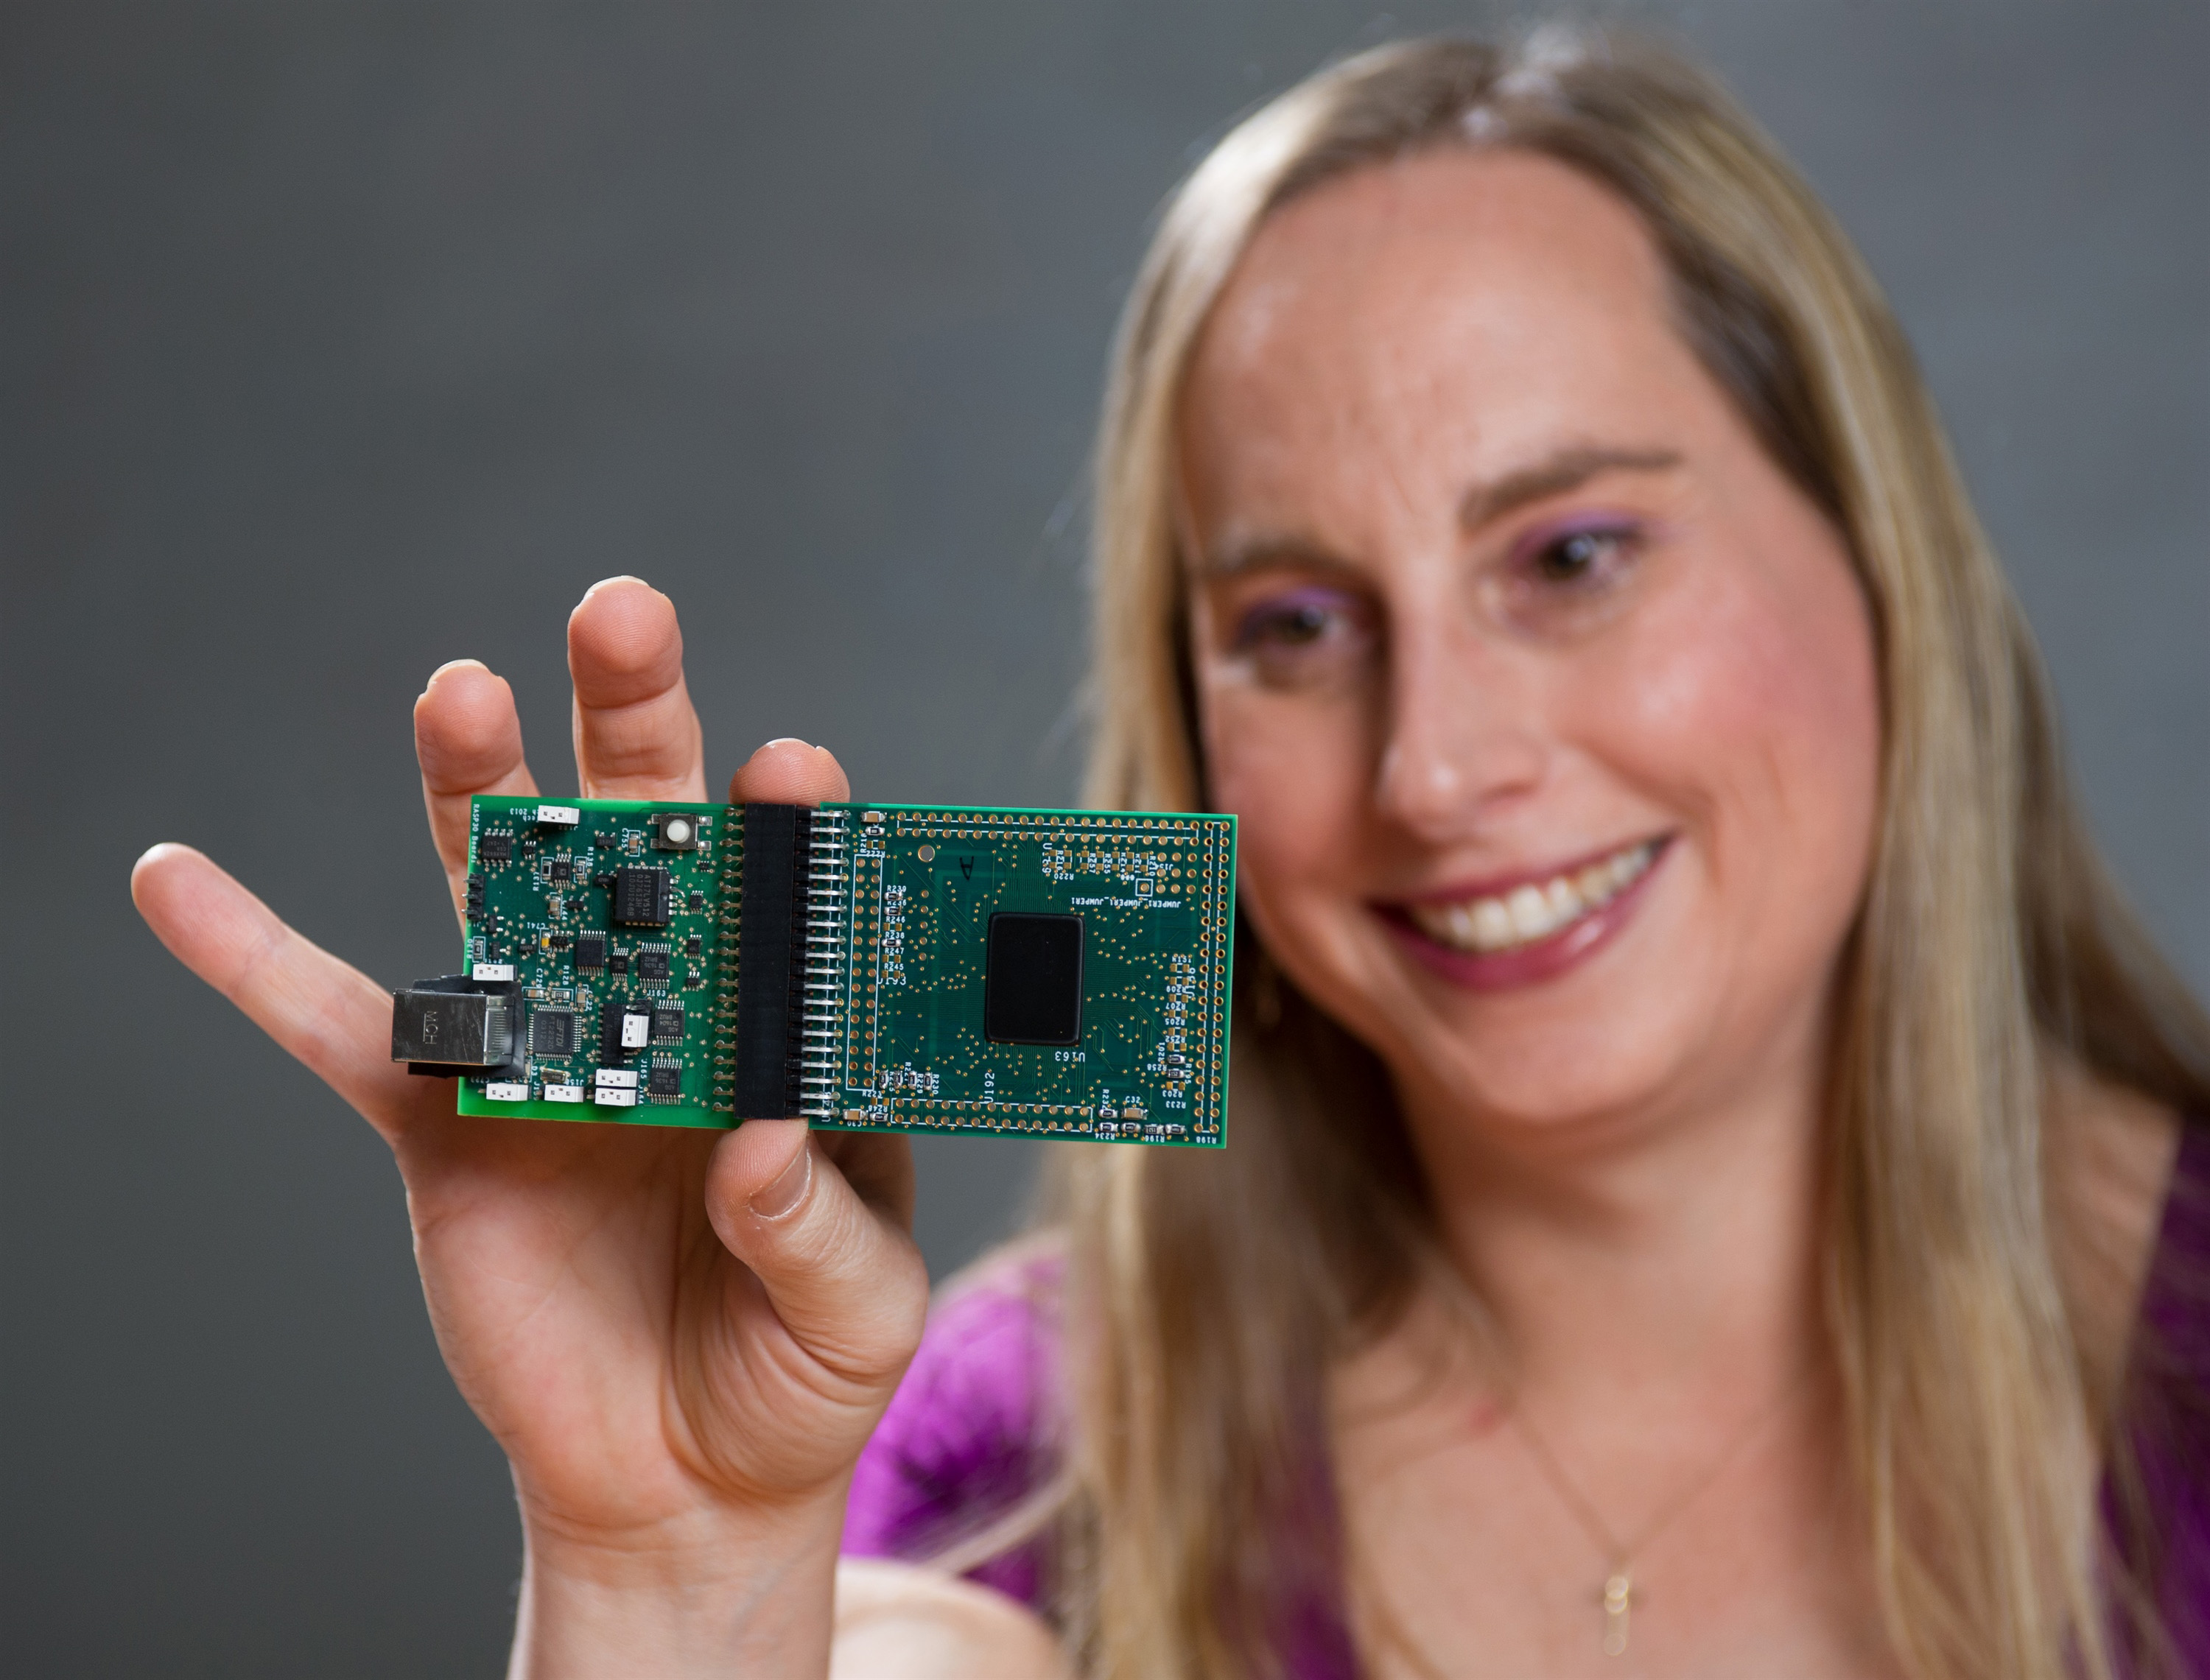 Professor Jennifer Hasler displays a field programmable analog array (FPAA) board that includes an integrated circuit with biological-based neuron structures for power-efficient calculation.  Hasler’s research indicates that this type of board, which is programmable but has low power requirements, could play an important role in advancing neuromorphic computing. (Georgia Tech Photo: Rob Felt)